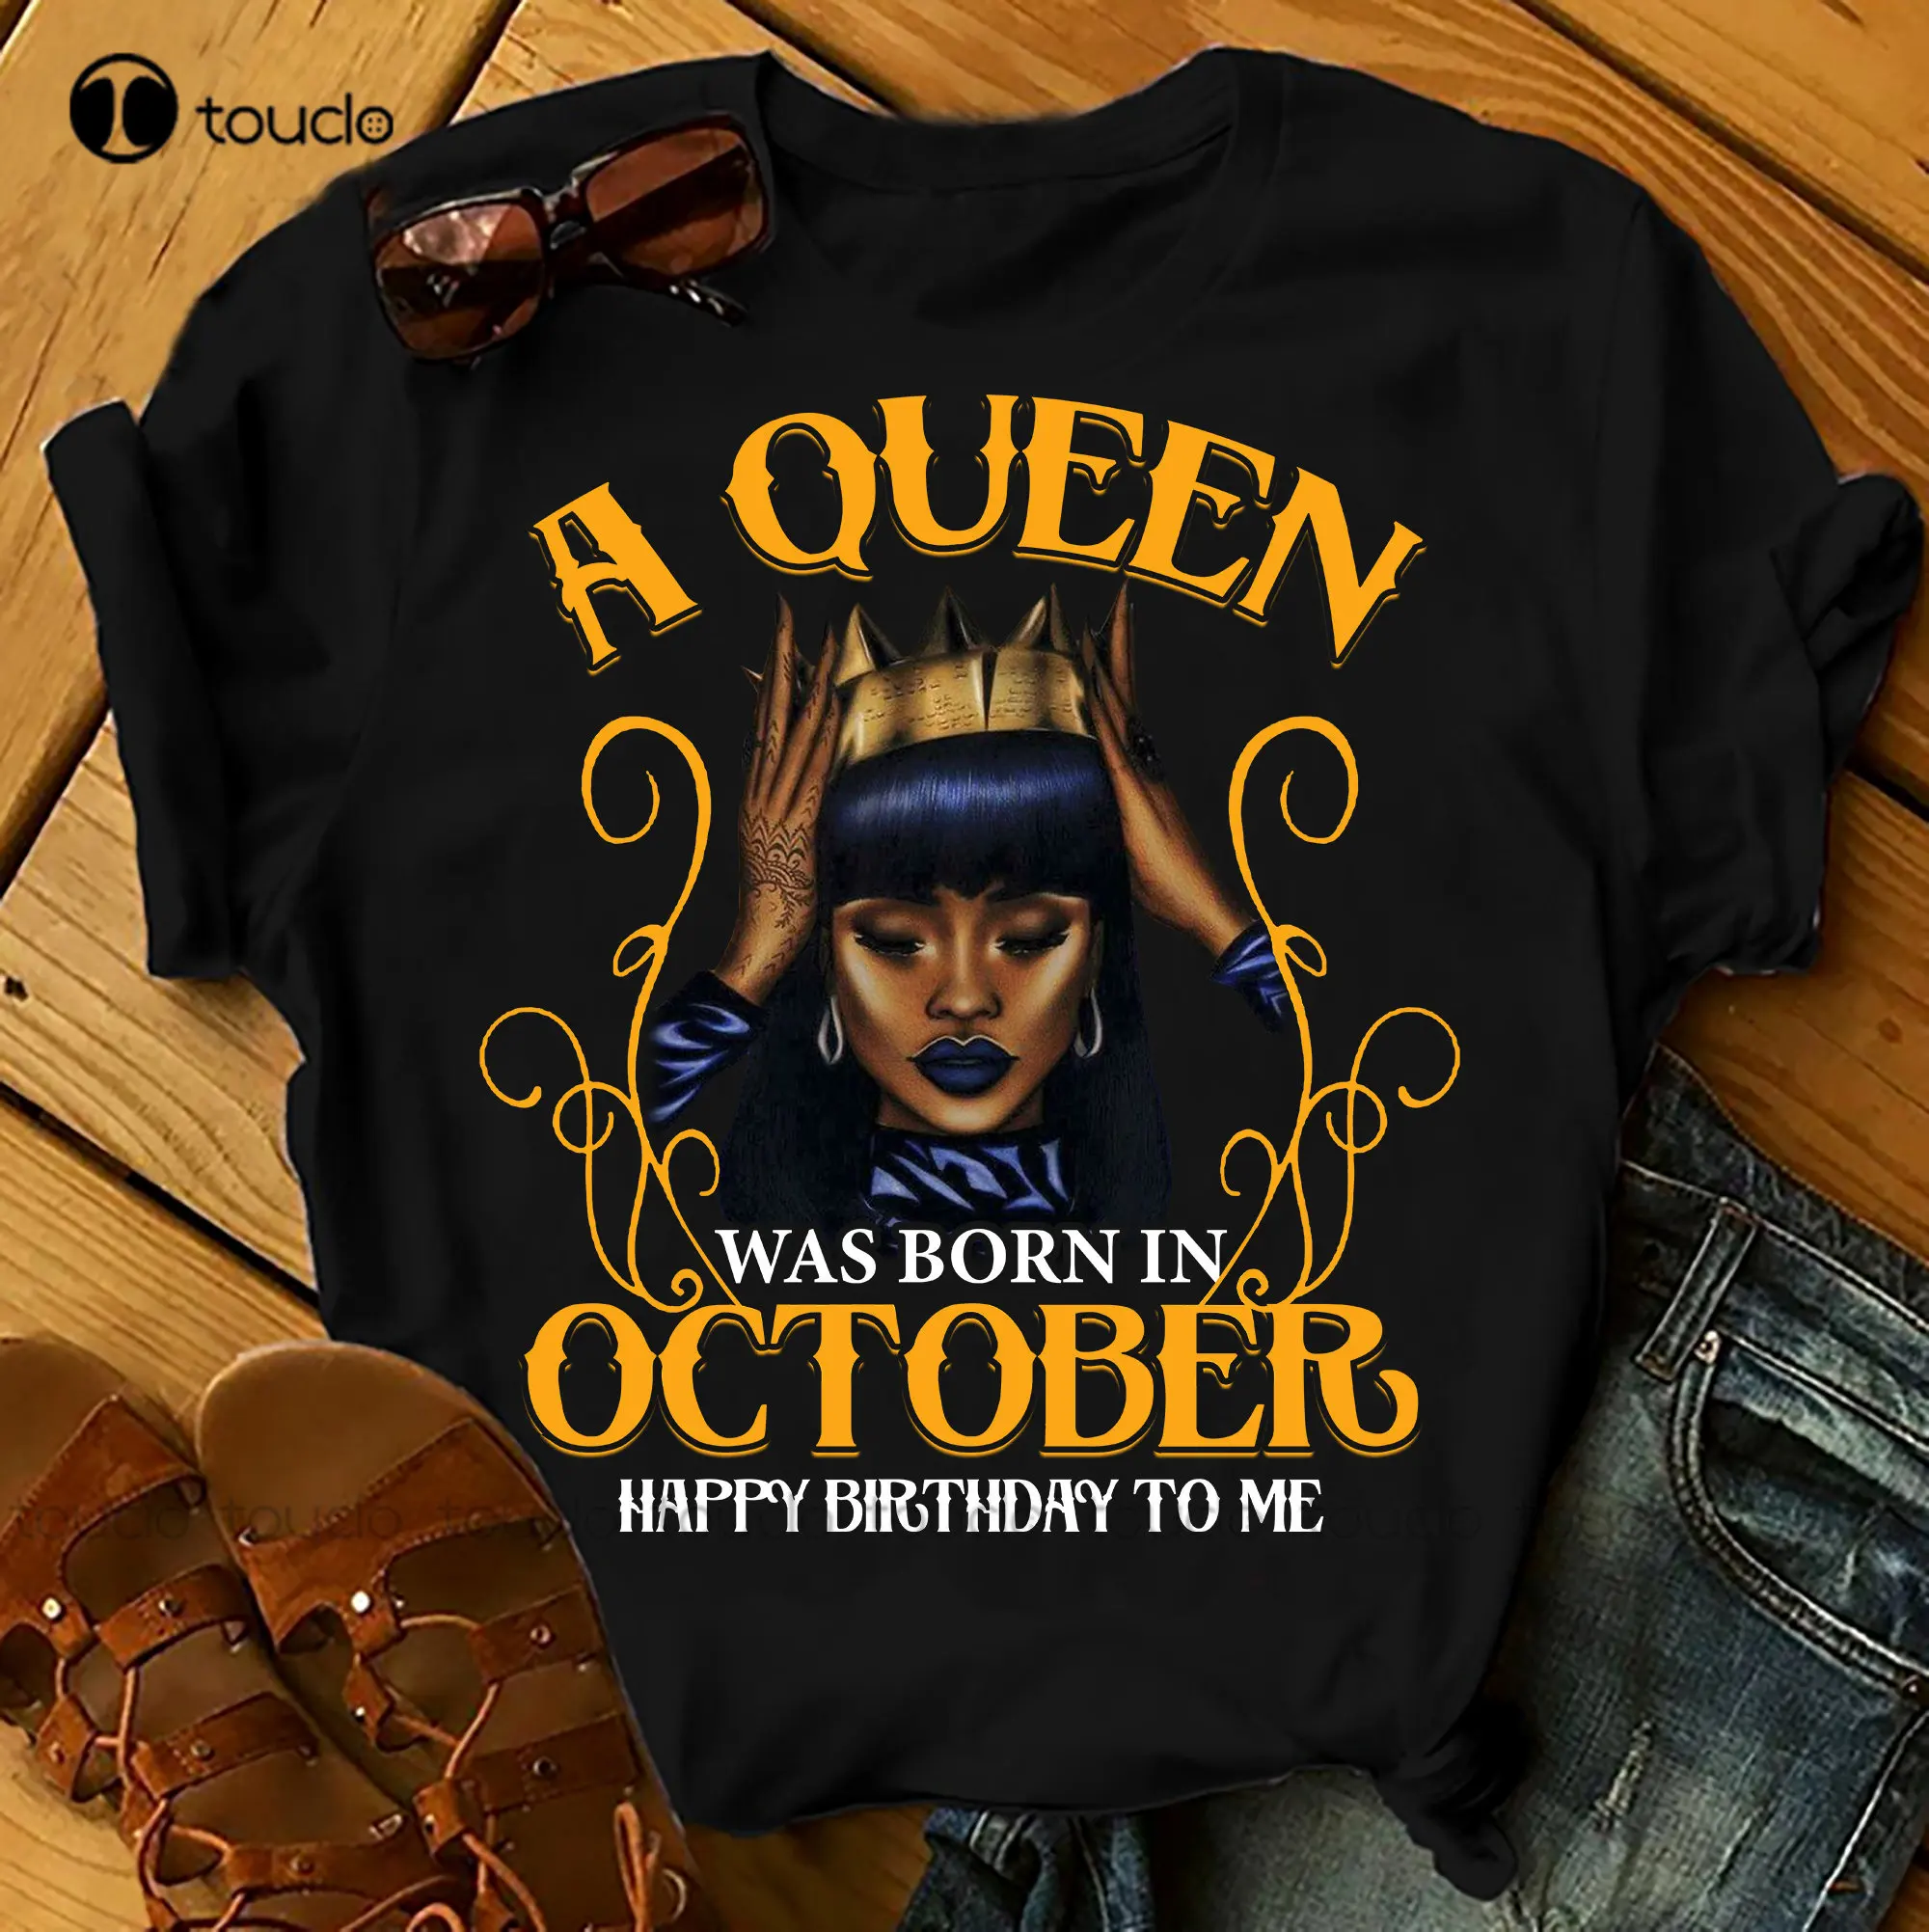 

A Queen Was Born In October Shirts Women Birthday T Shirts Summer Tops Beach T Shirts Shirt For Men Xs-5Xl Breathable Cotton New